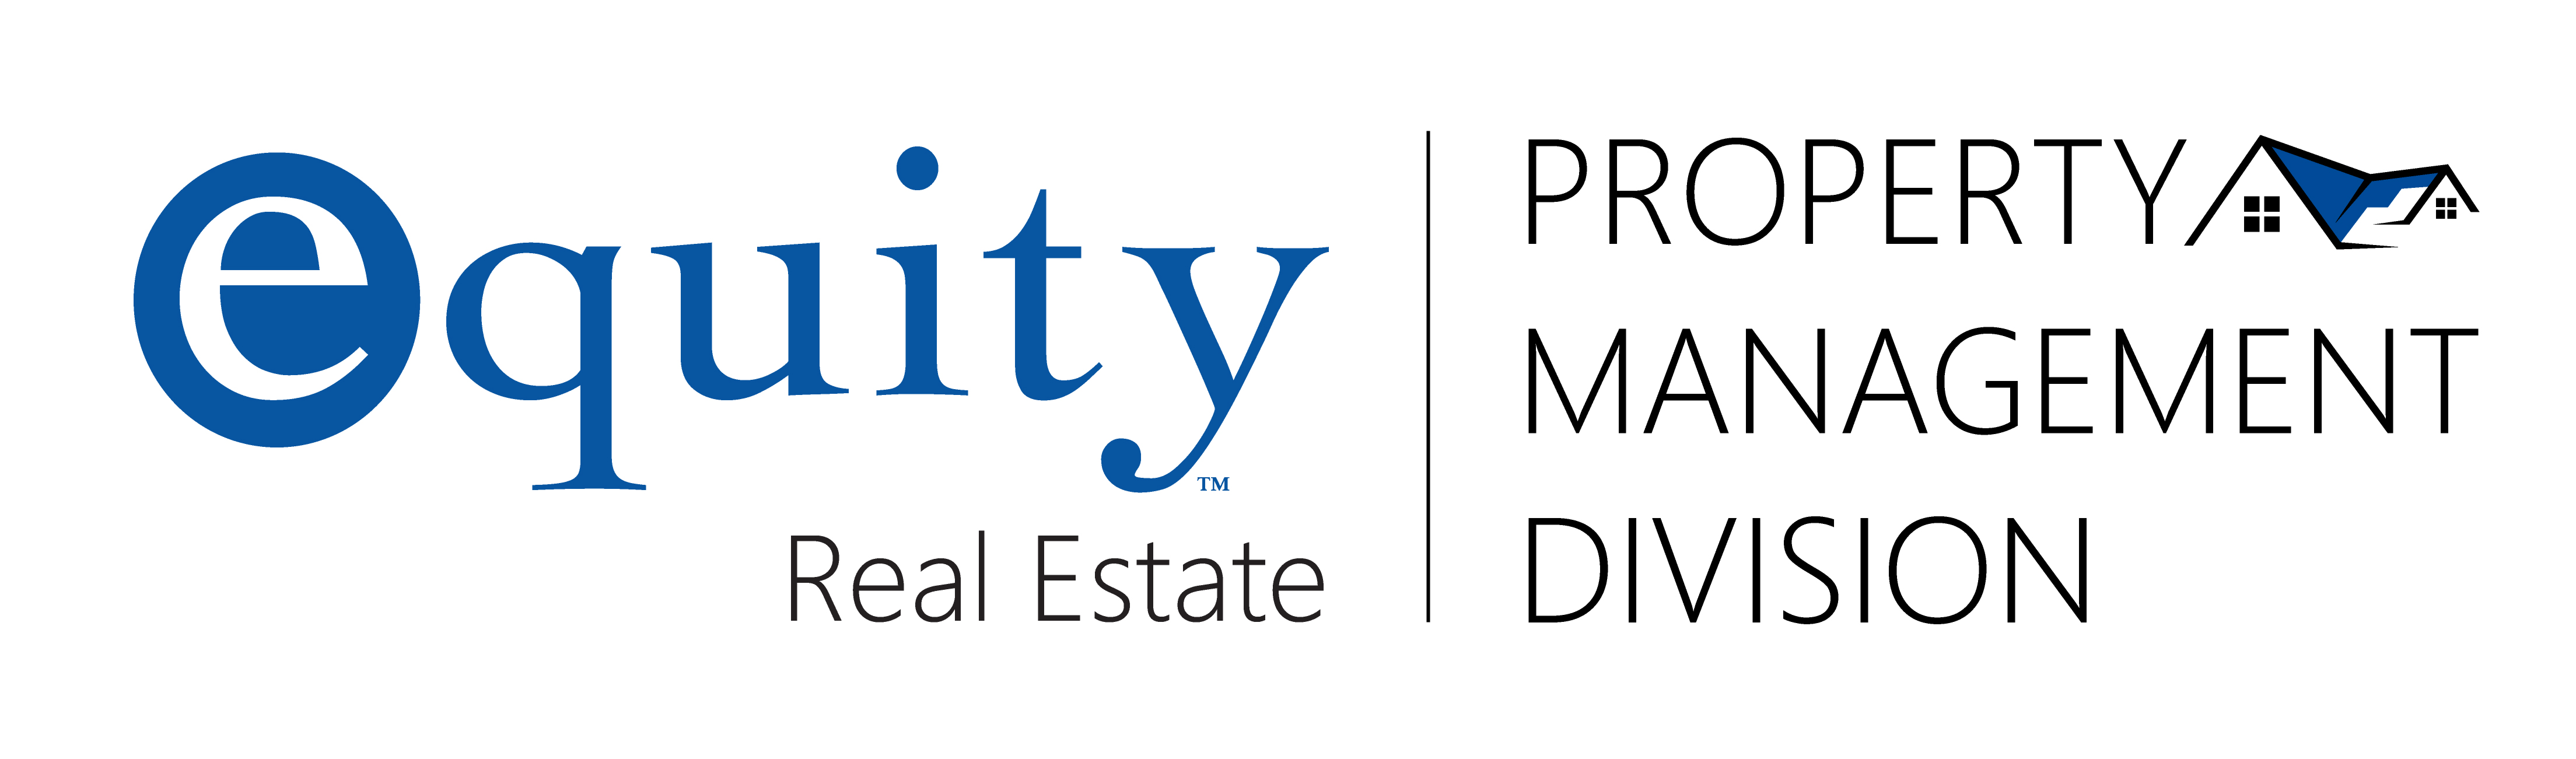 Equity Real Estate - Property Management Division